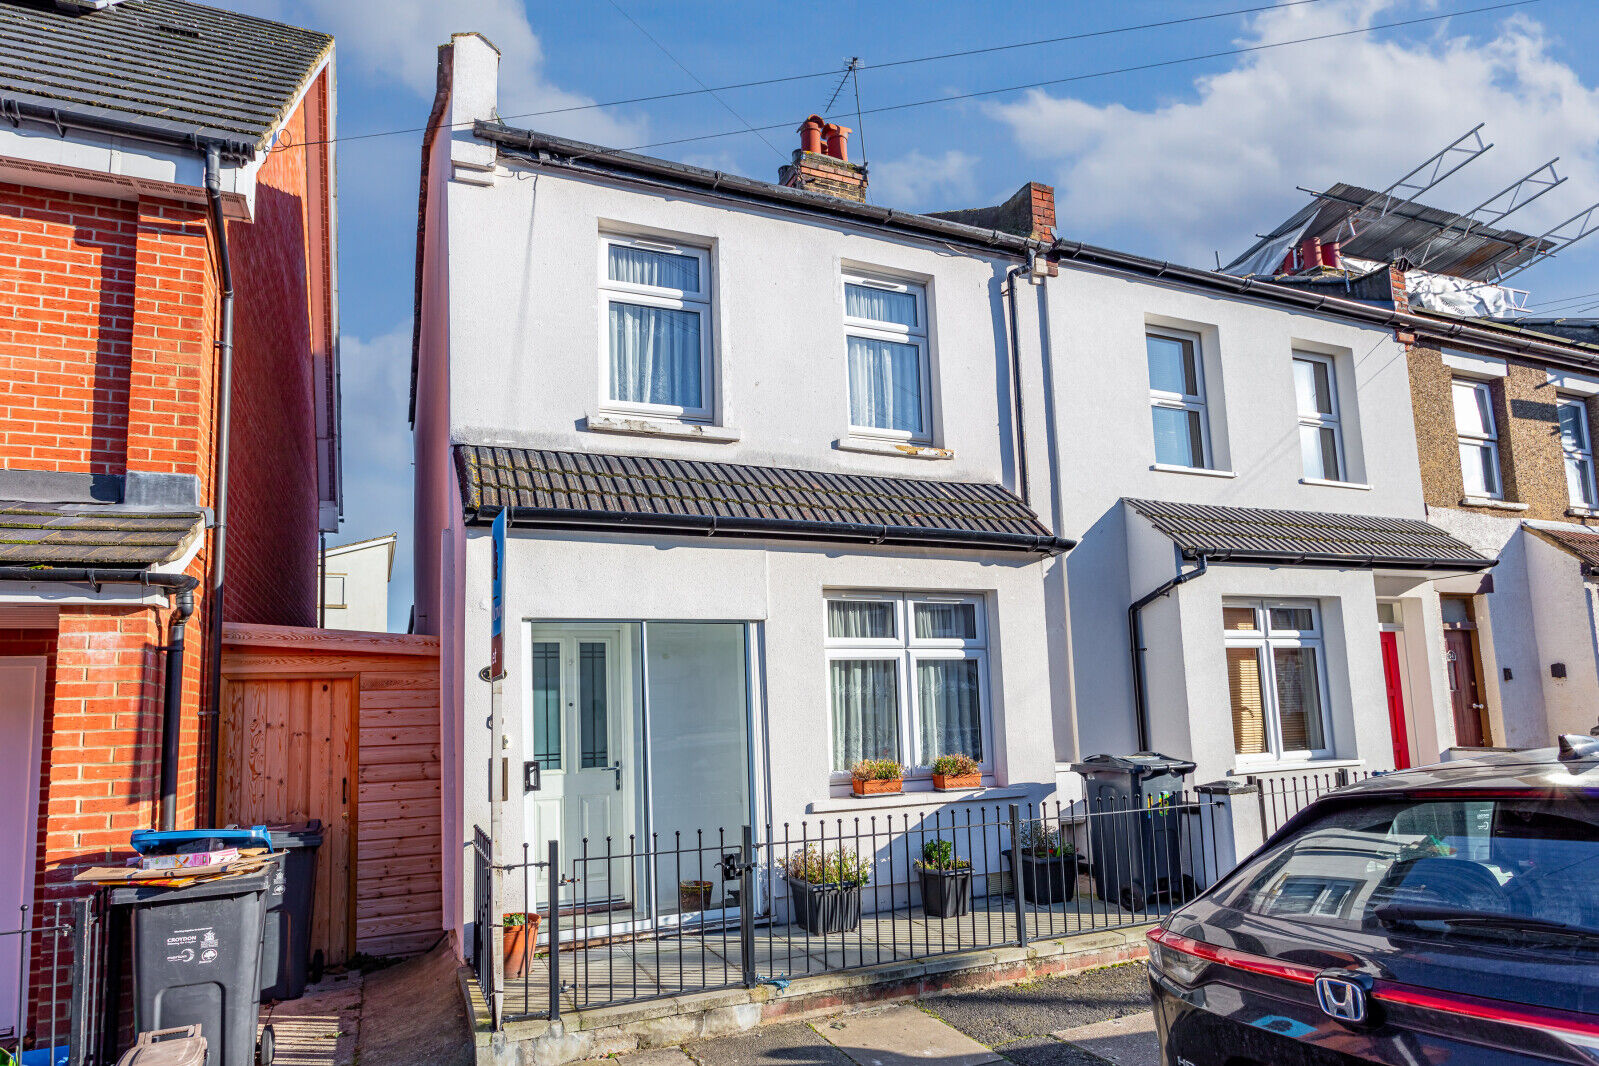 3 bedroom end terraced house for sale Seaton Road, Mitcham, CR4, main image